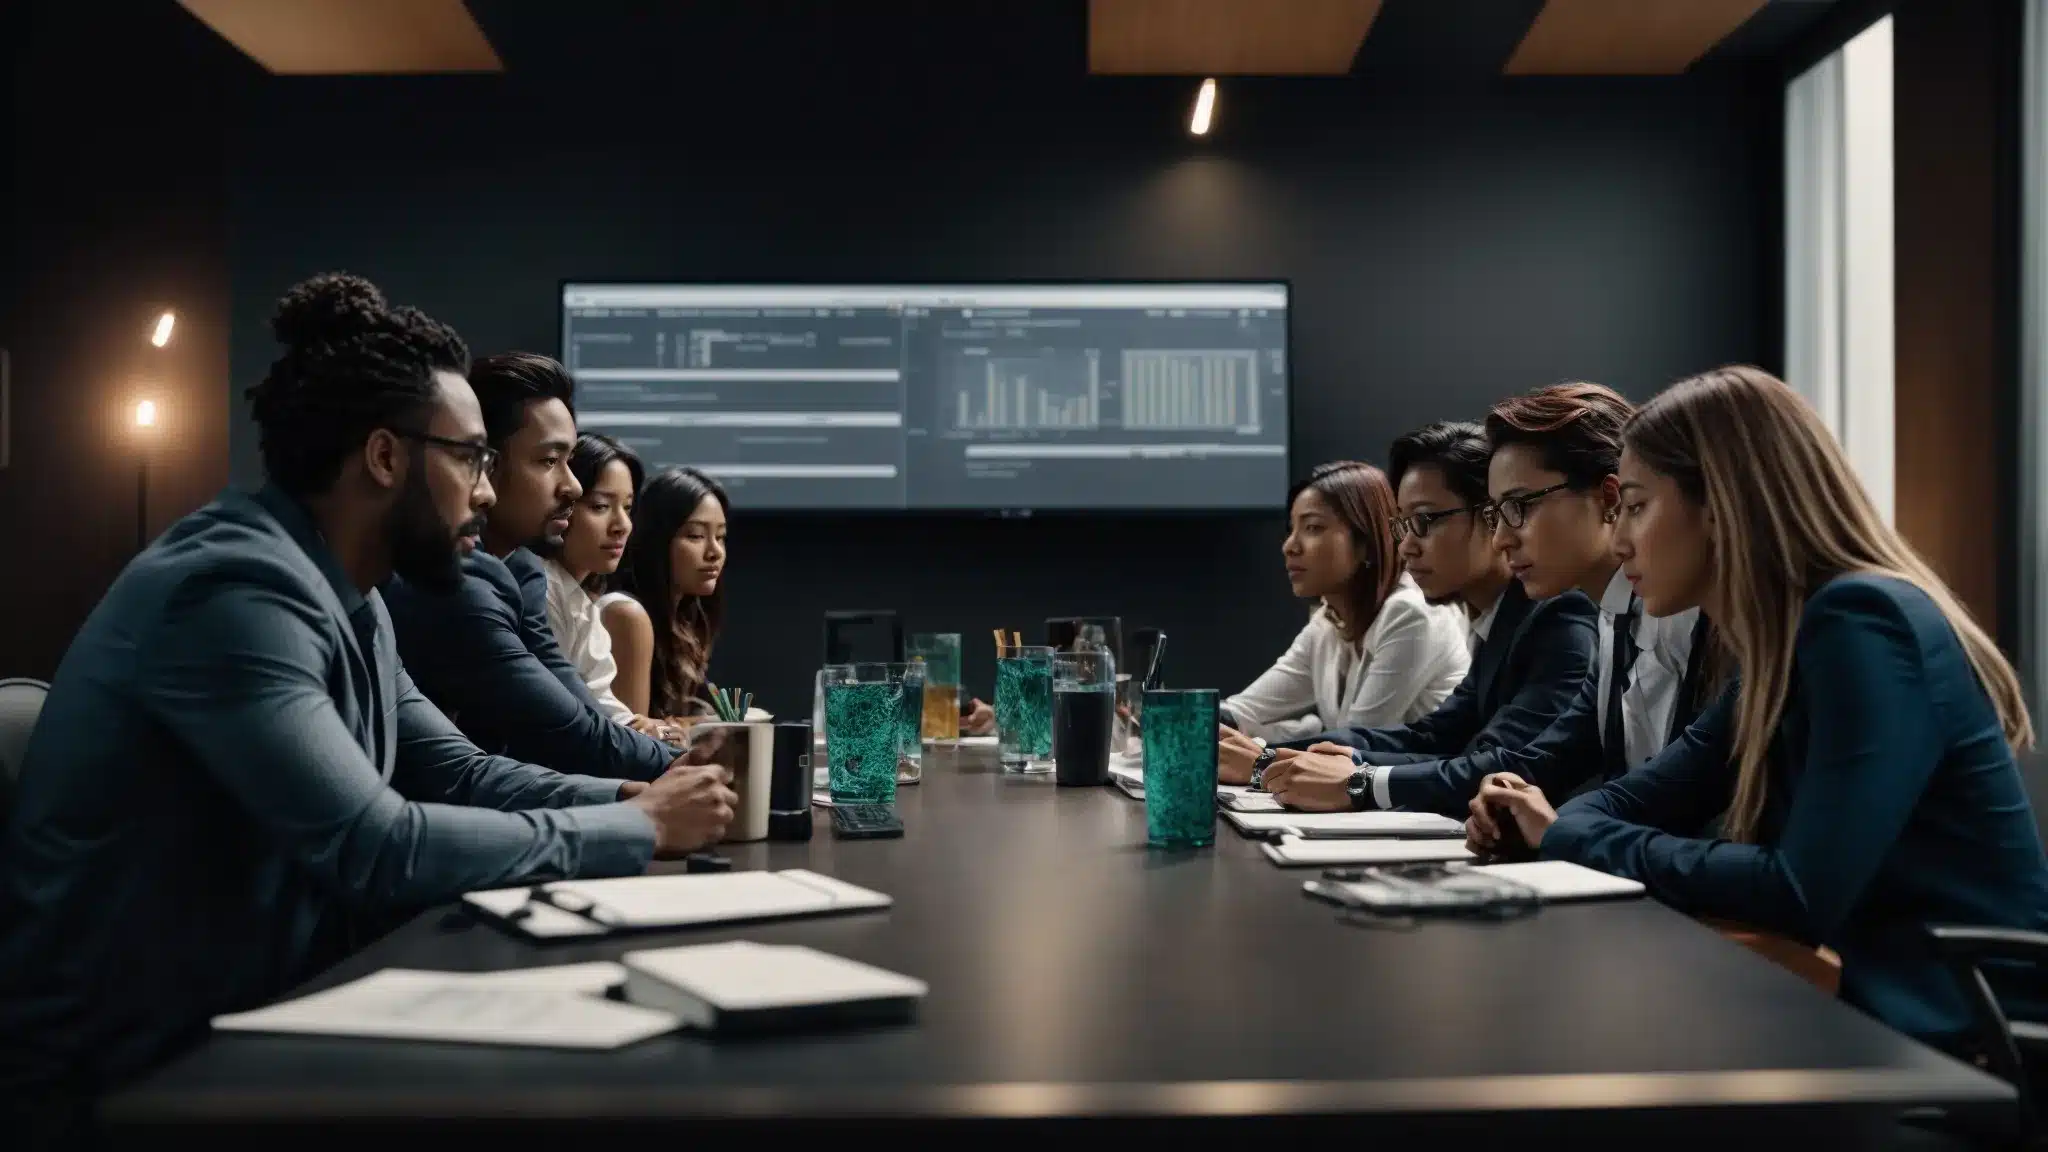 A Diverse Team Of Professionals Gathers Around A Conference Table, Analyzing Data On Multiple Screens And Discussing A Comprehensive Digital Marketing Plan.